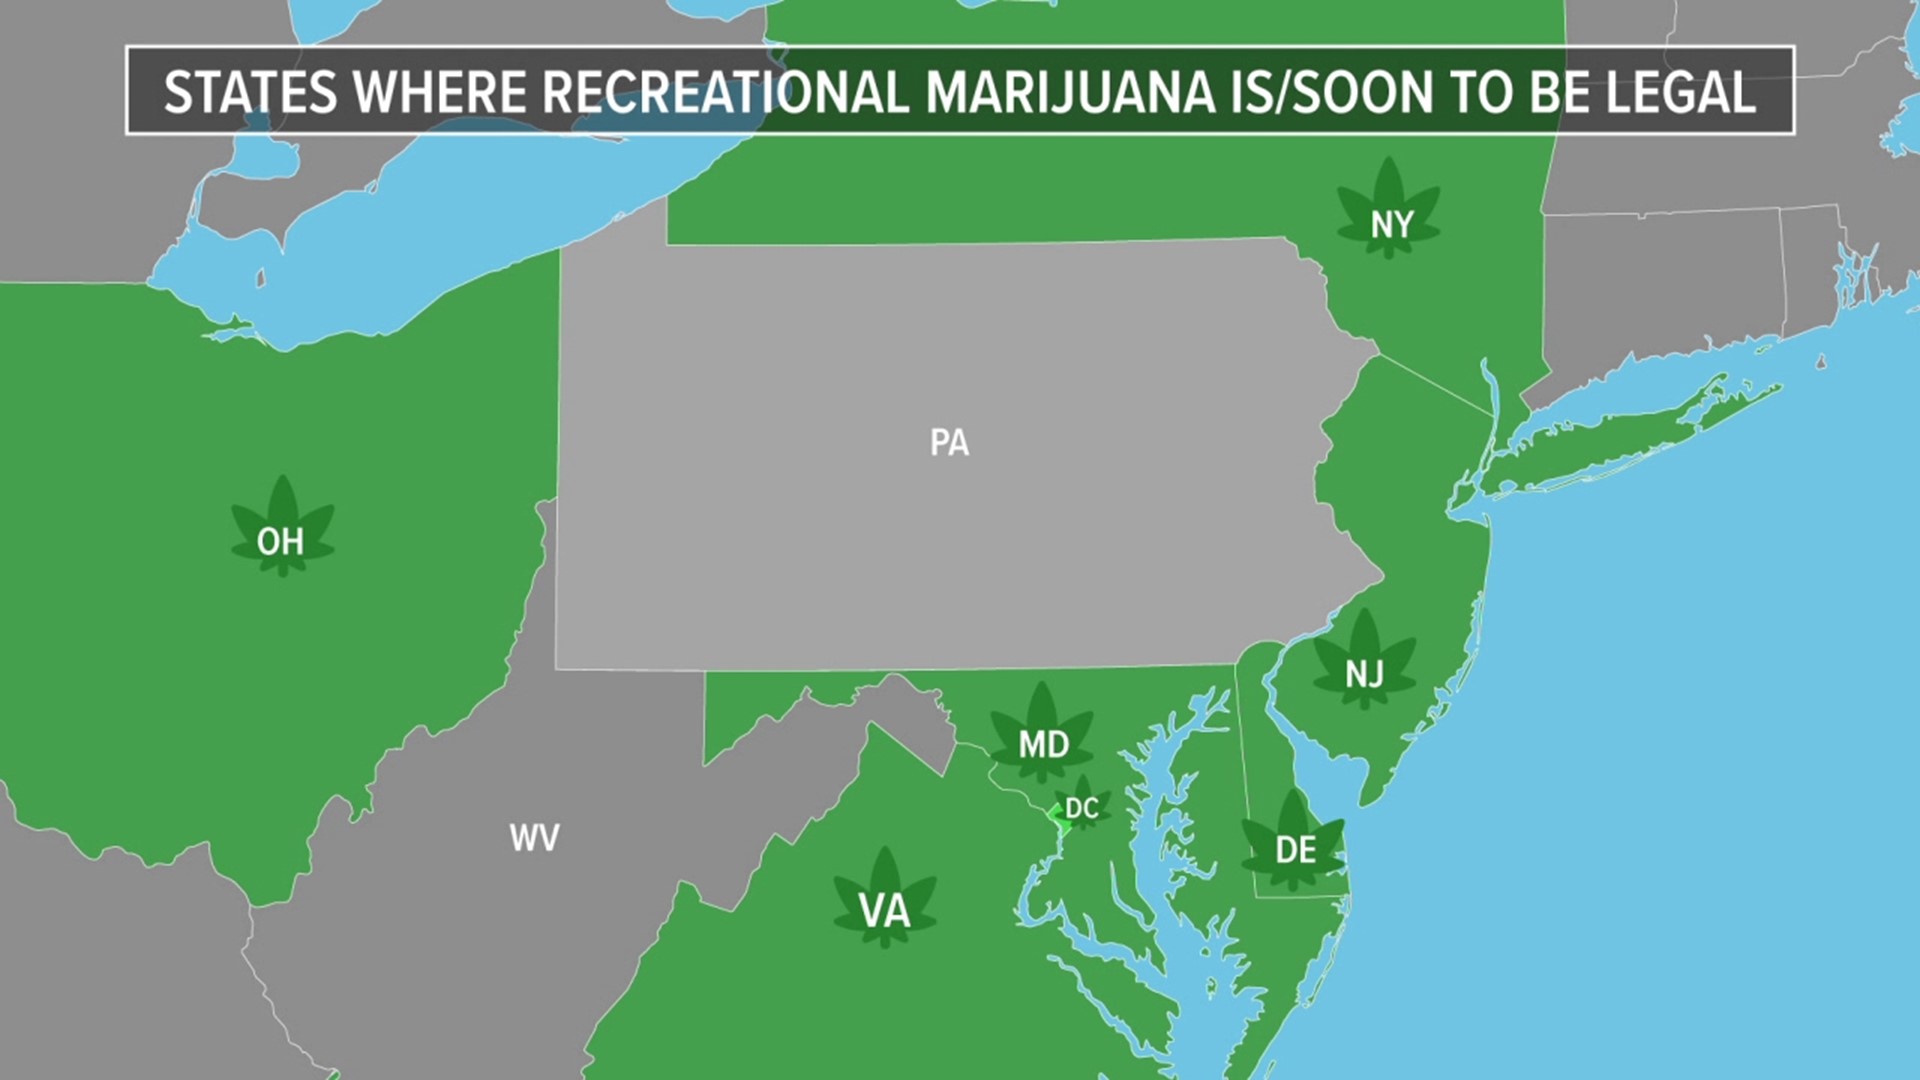 With more states legalizing recreational use, residents weigh-in on what they think about weed.